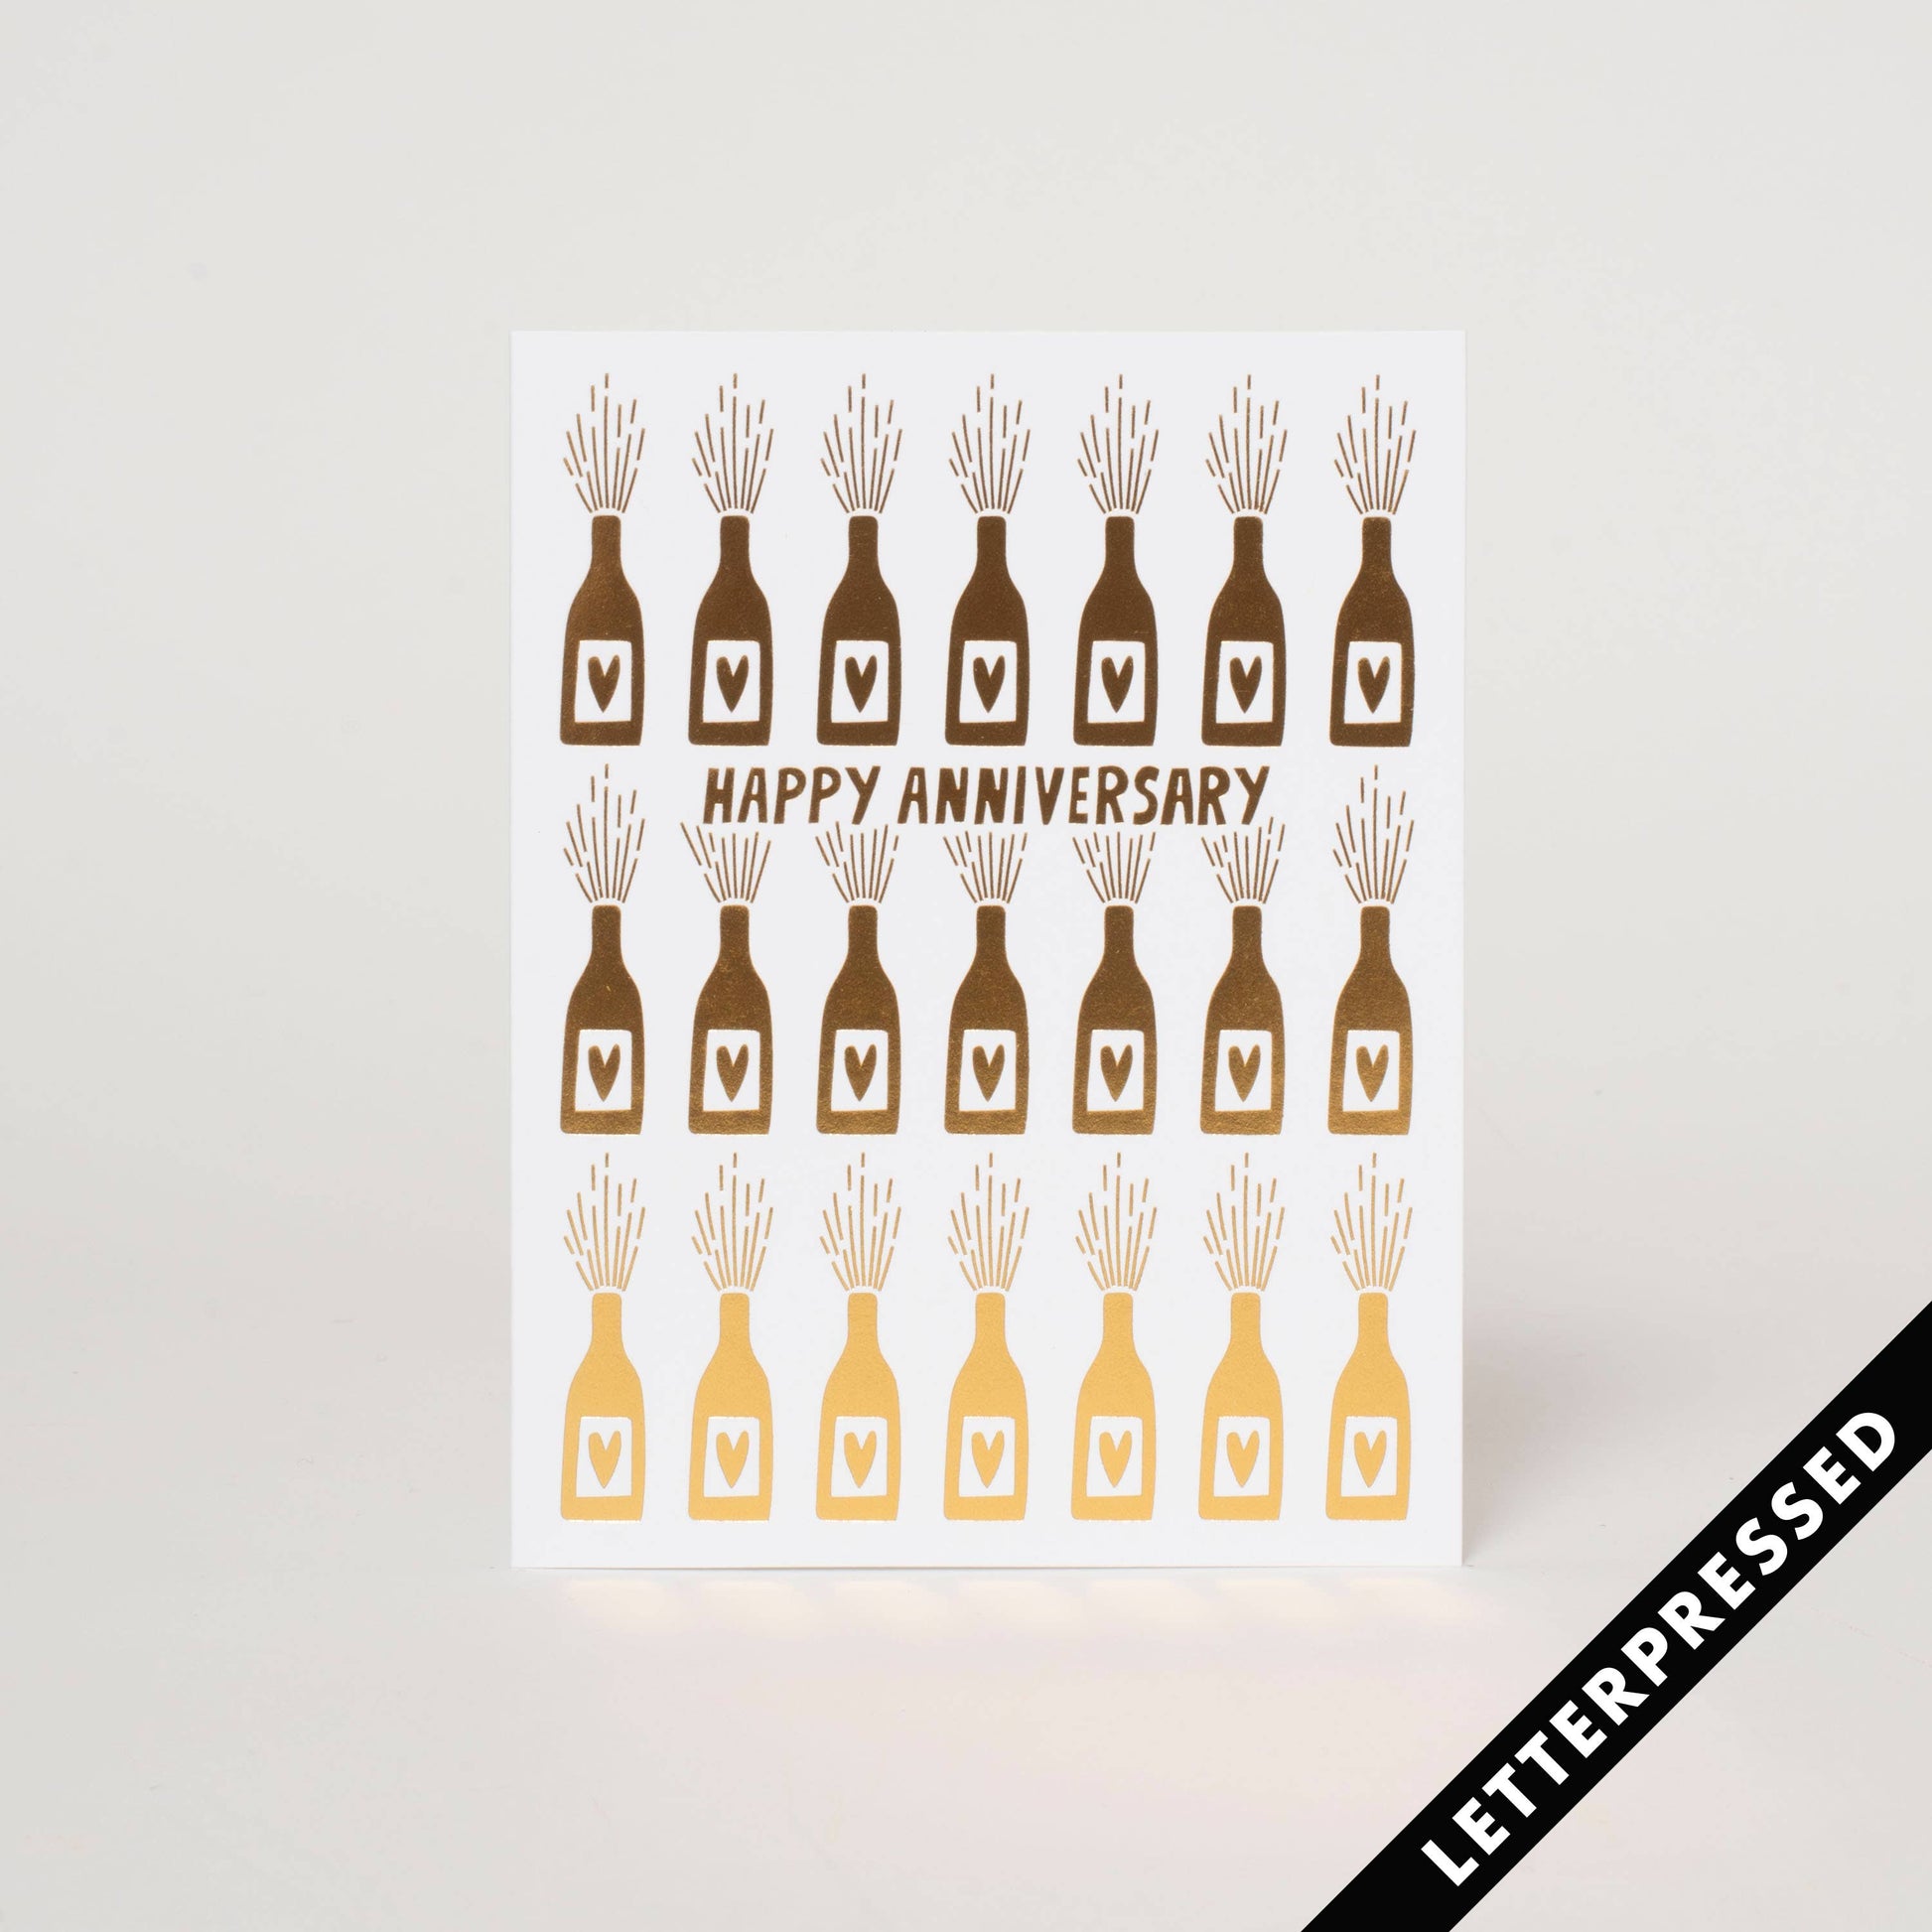 Greeting card printed in metallic ink. Text "Happy Anniversary" surrounded by wine bottles with hearts on each label, popping open in celebration.